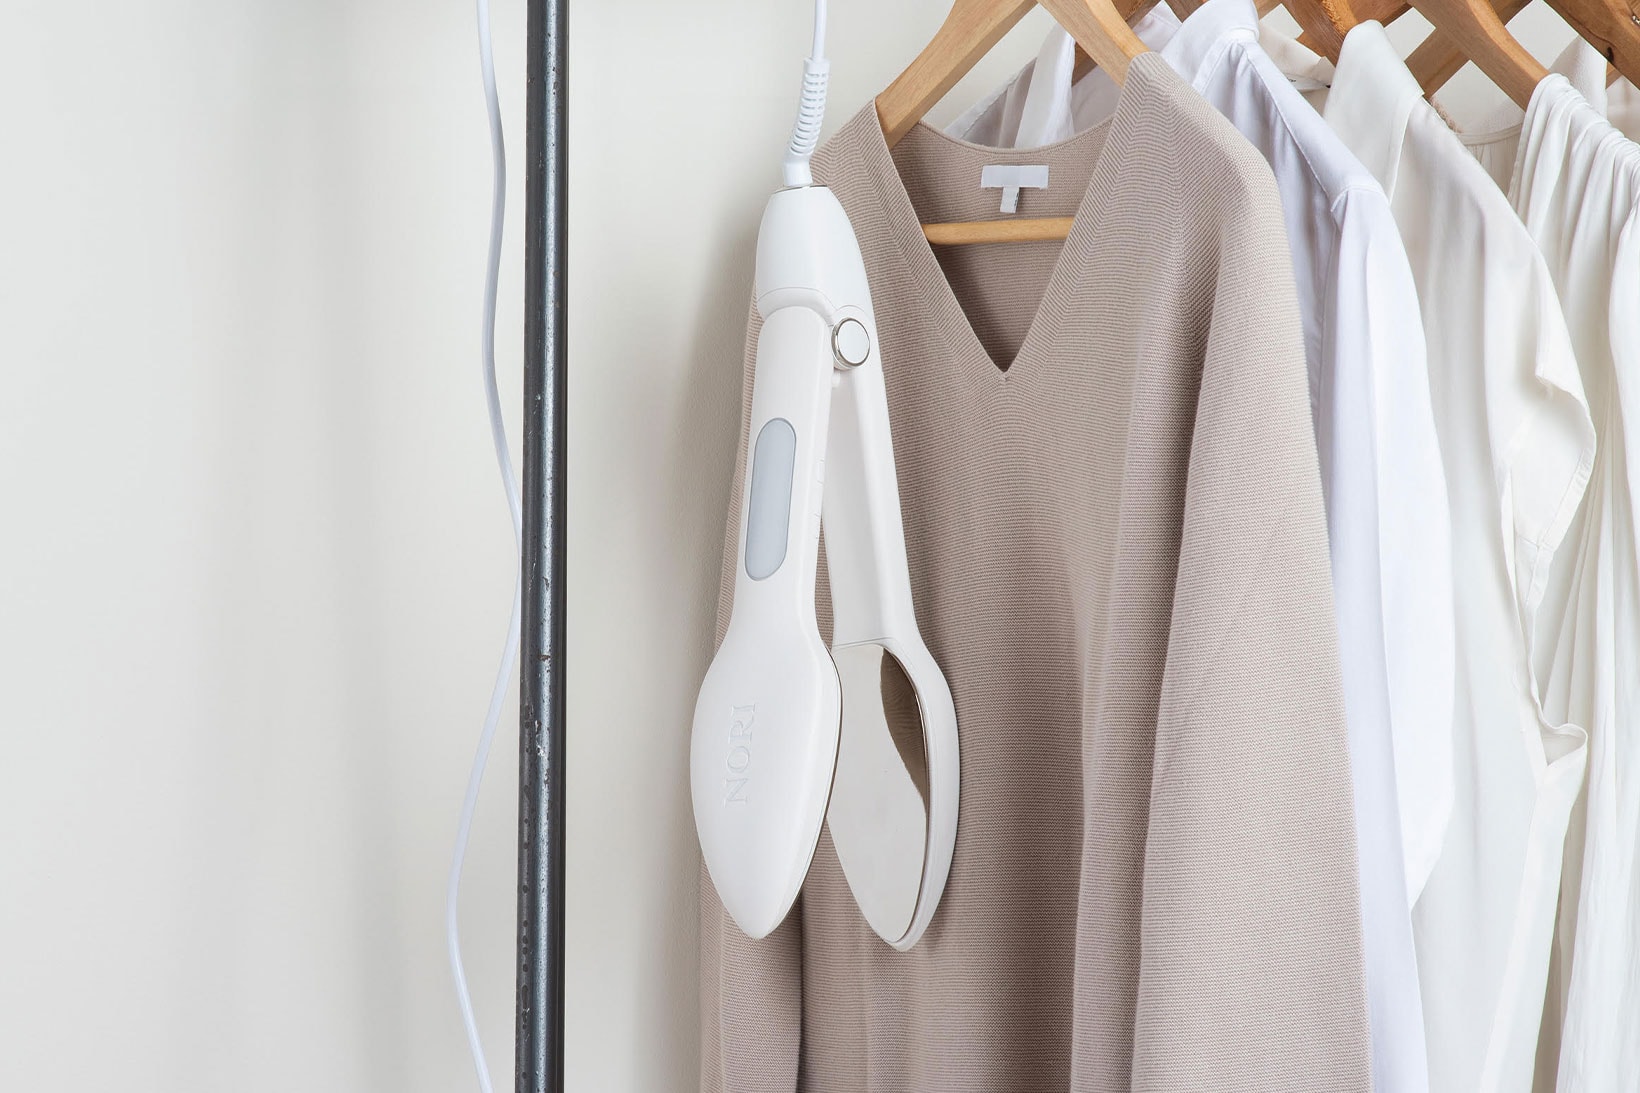 the nori press steaming ironing clothes hanger